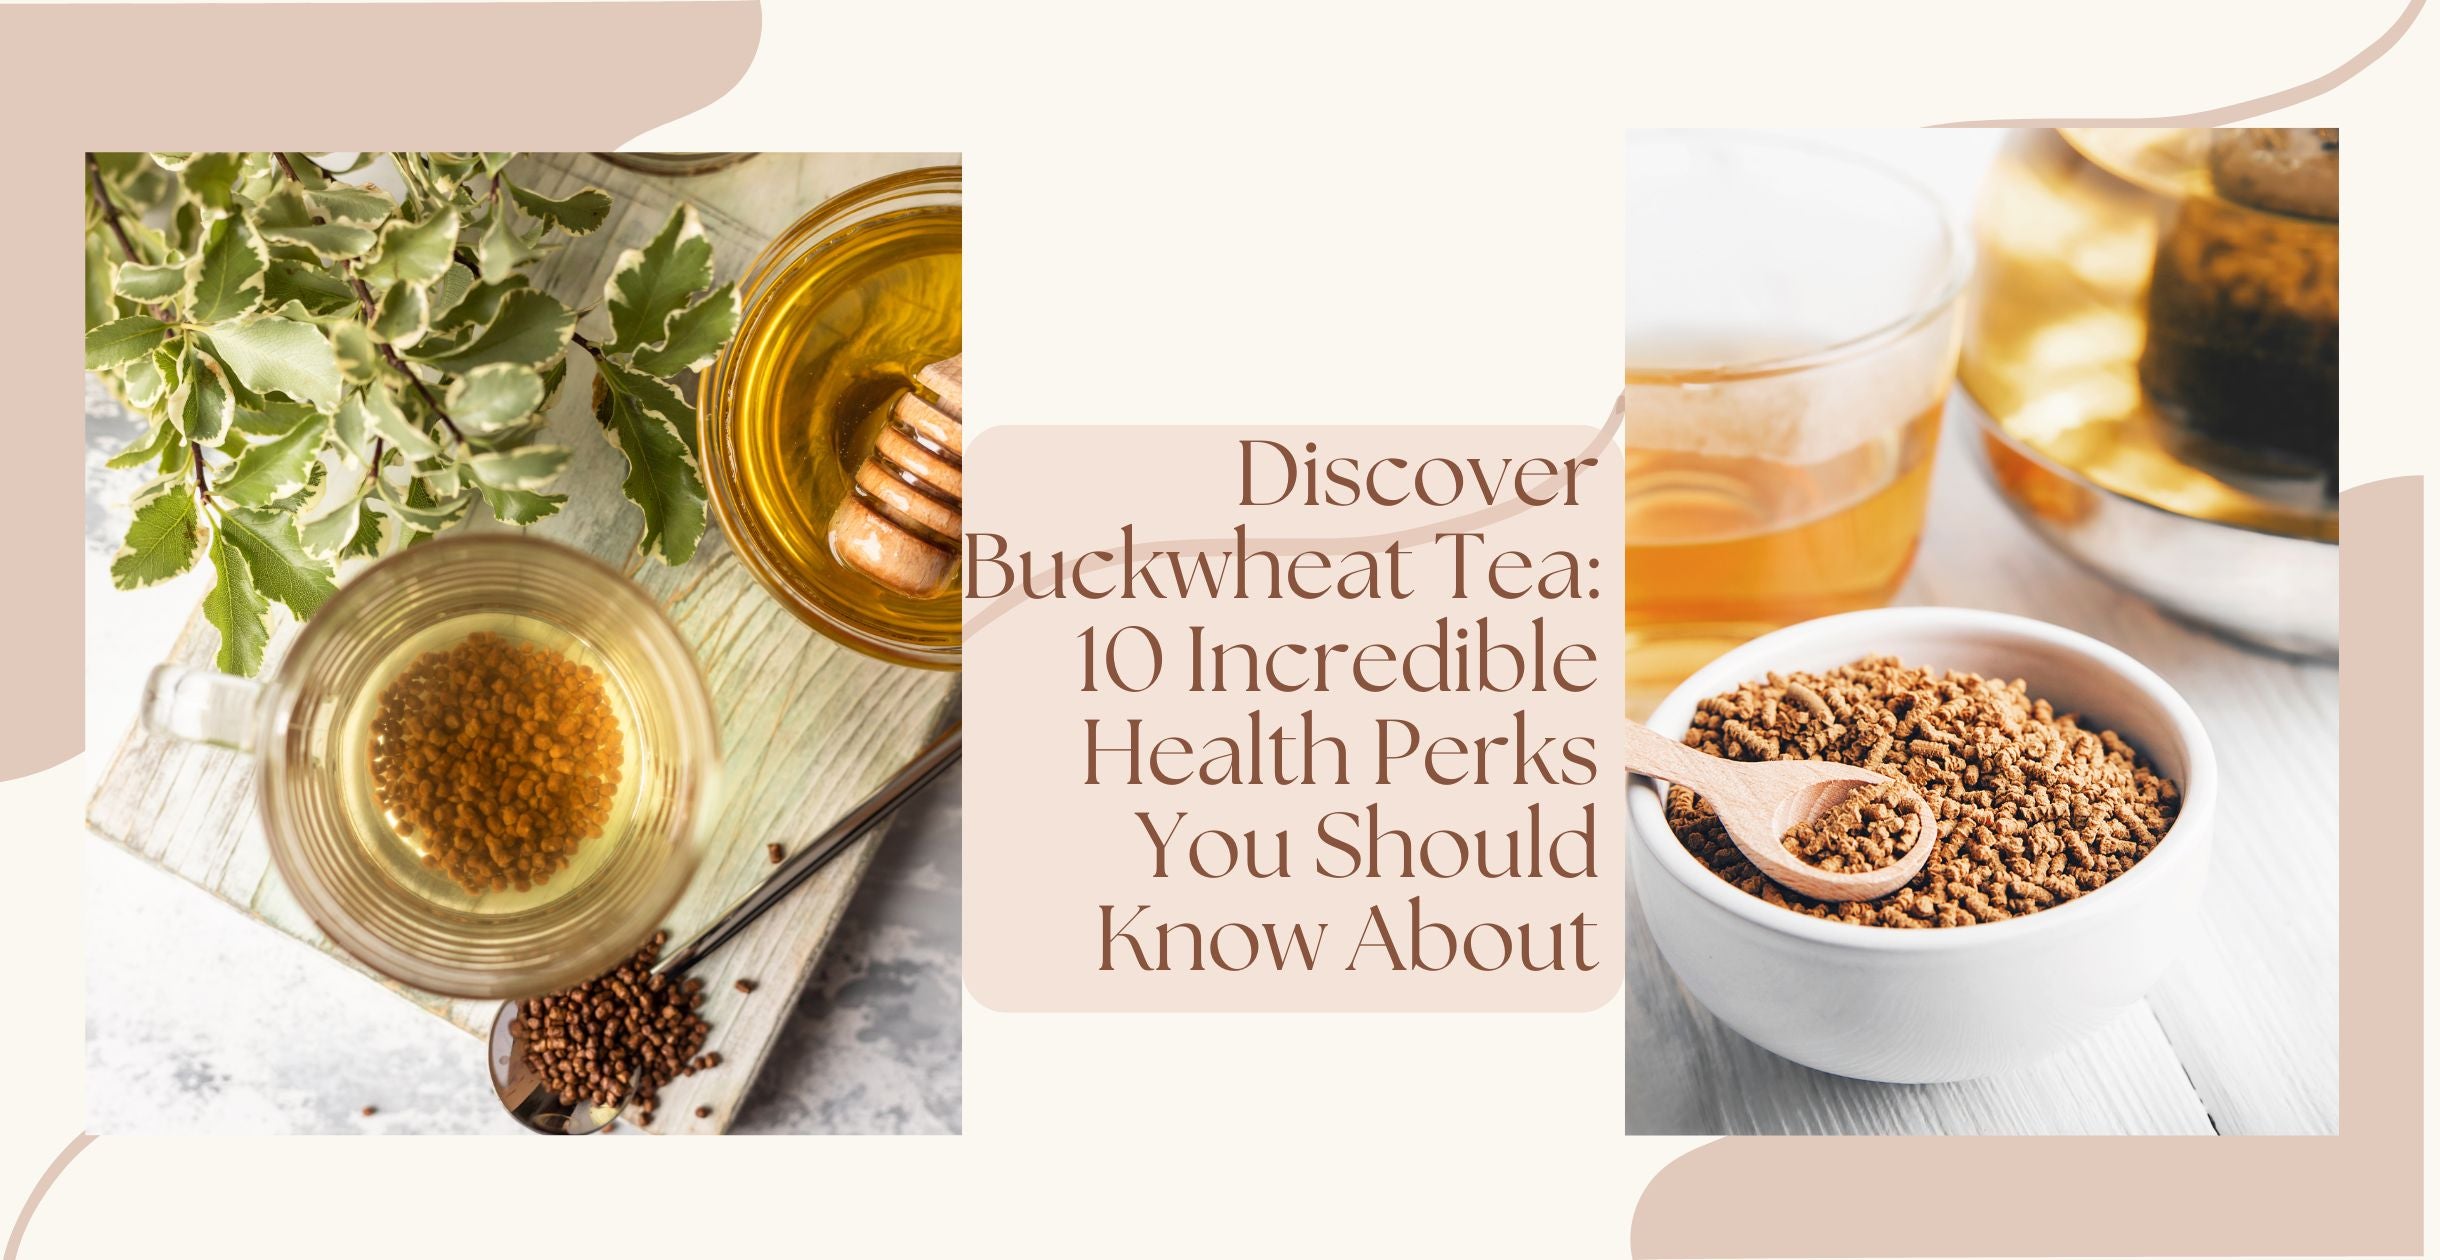 Discover Buckwheat Tea: 10 Incredible Health Perks You Should Know About